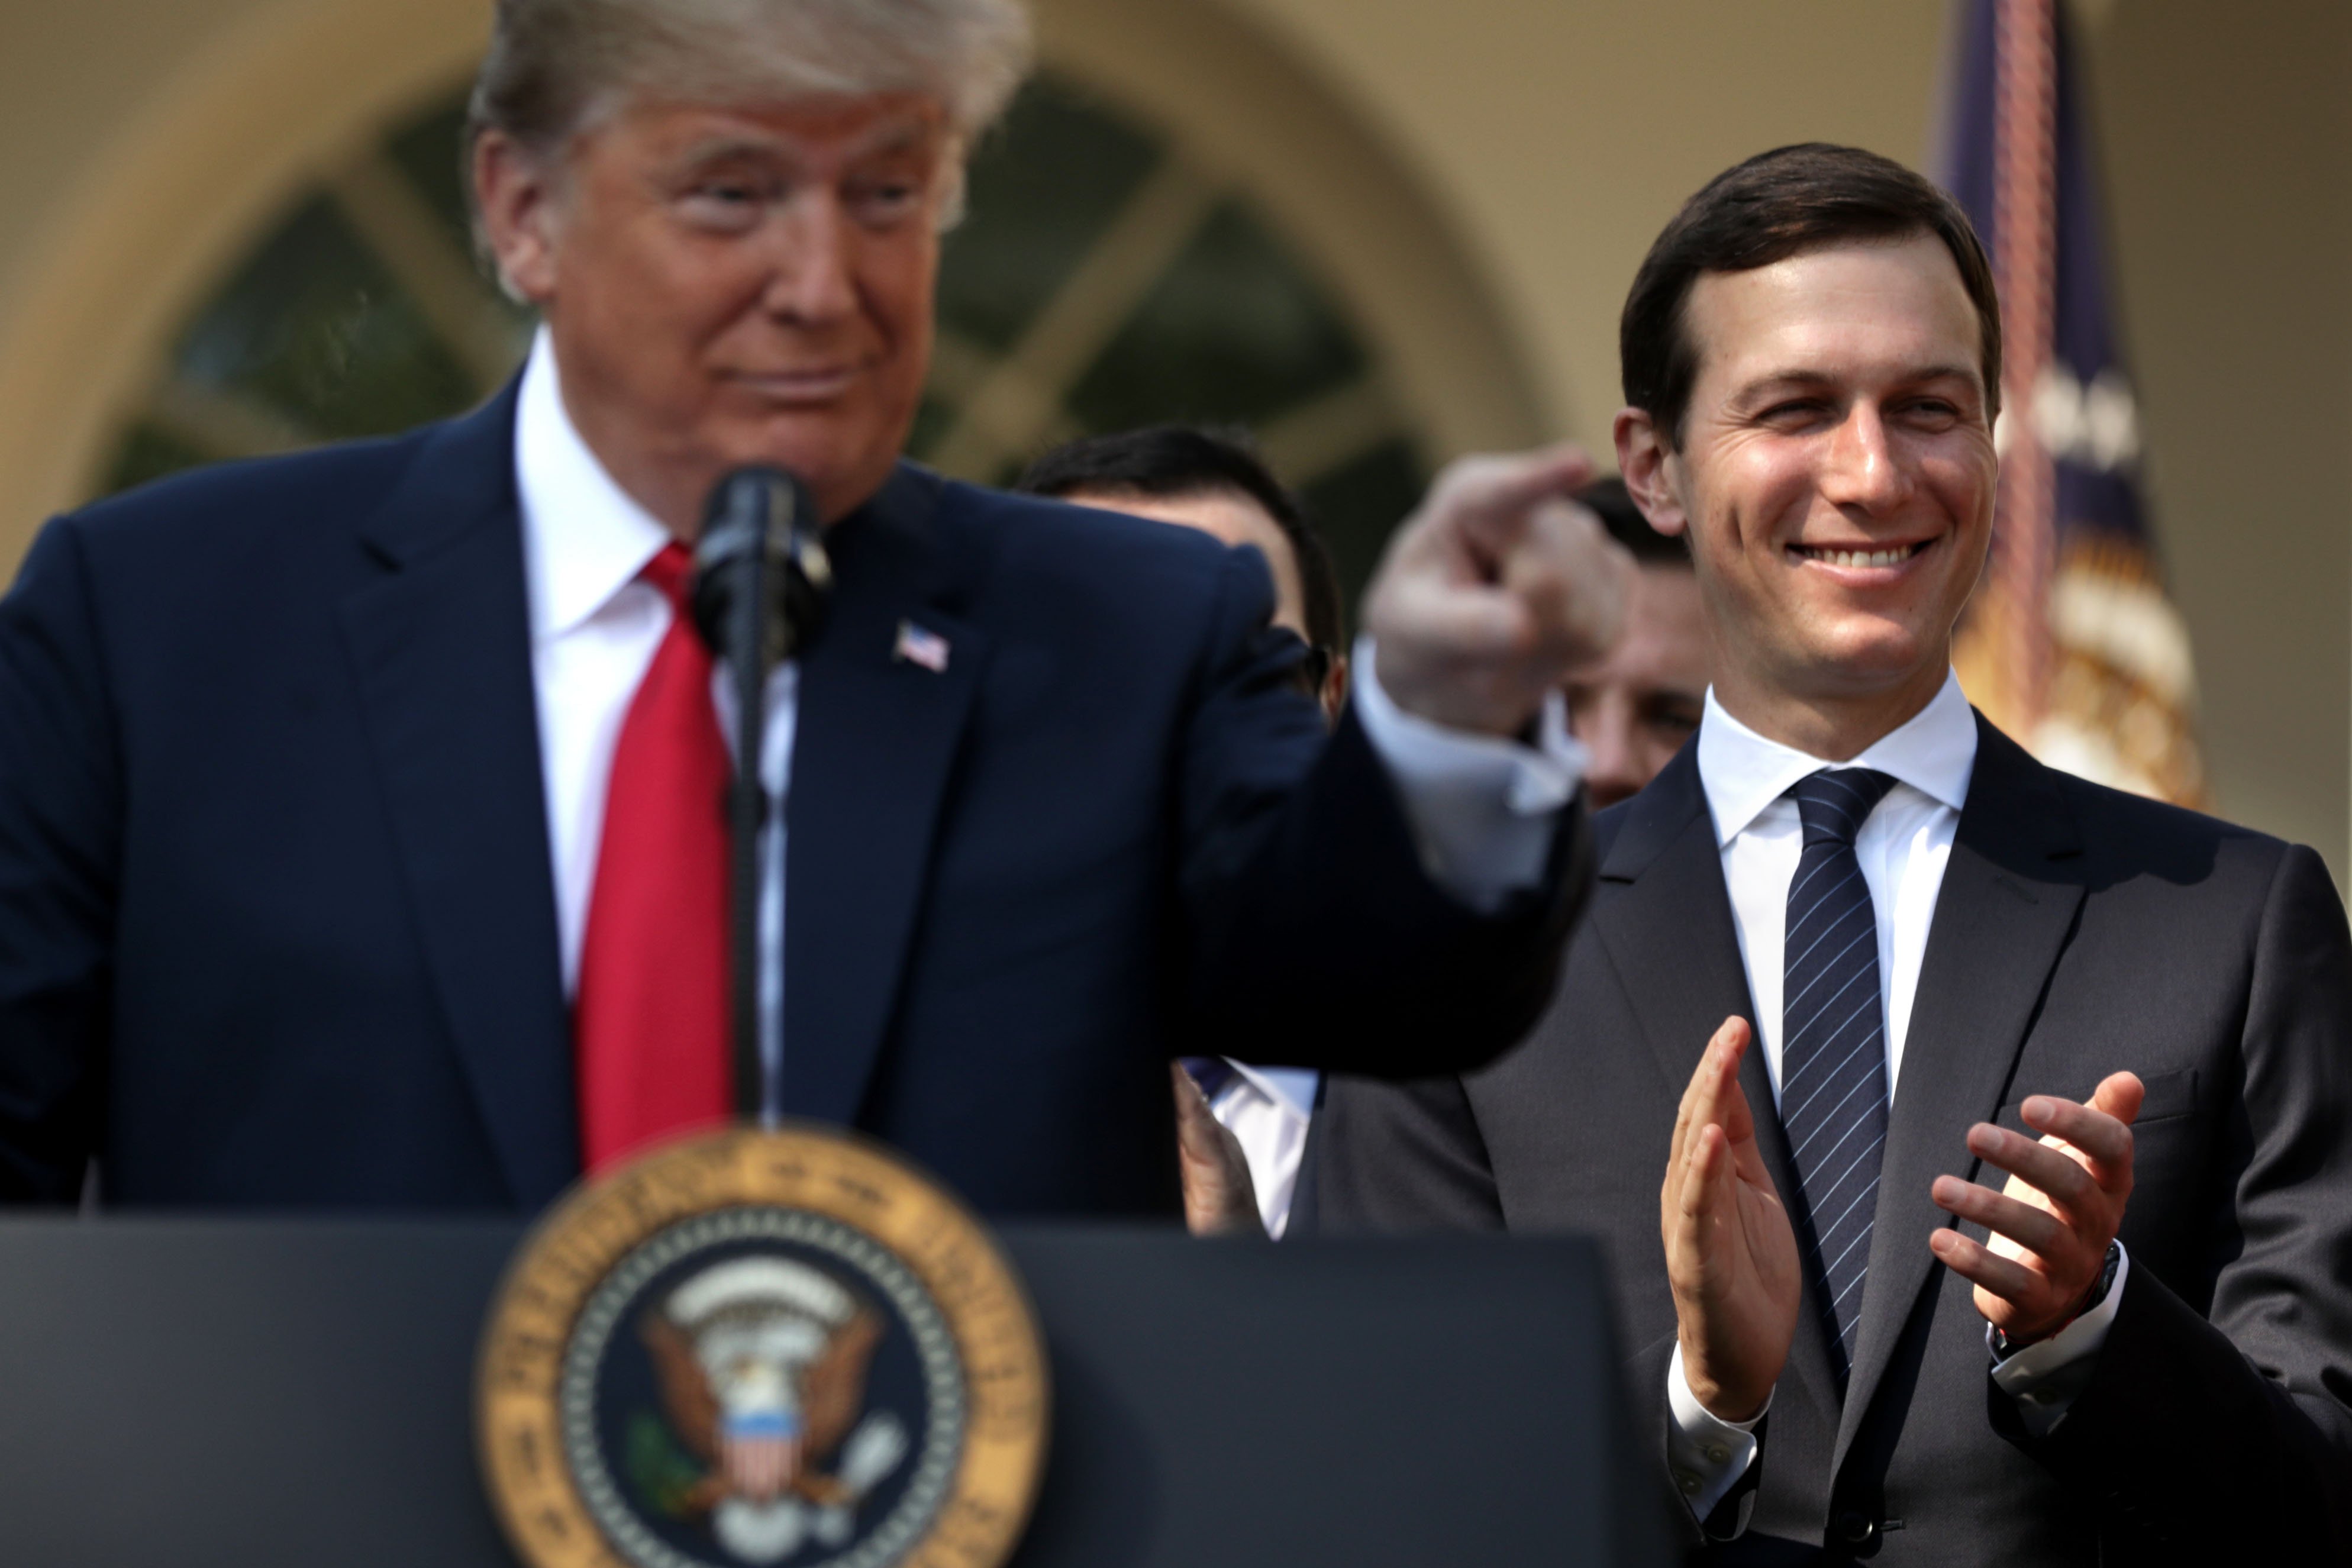 Senior Advisor to the President Jared Kushner joins U.S. President Donald Trump as he holds a press conference to discuss a revised U.S. trade agreement with Mexico and Canada in the Rose Garden of the White House on October 1, 2018 in Washington, DC. (Photo by Chip Somodevilla/Getty Images)